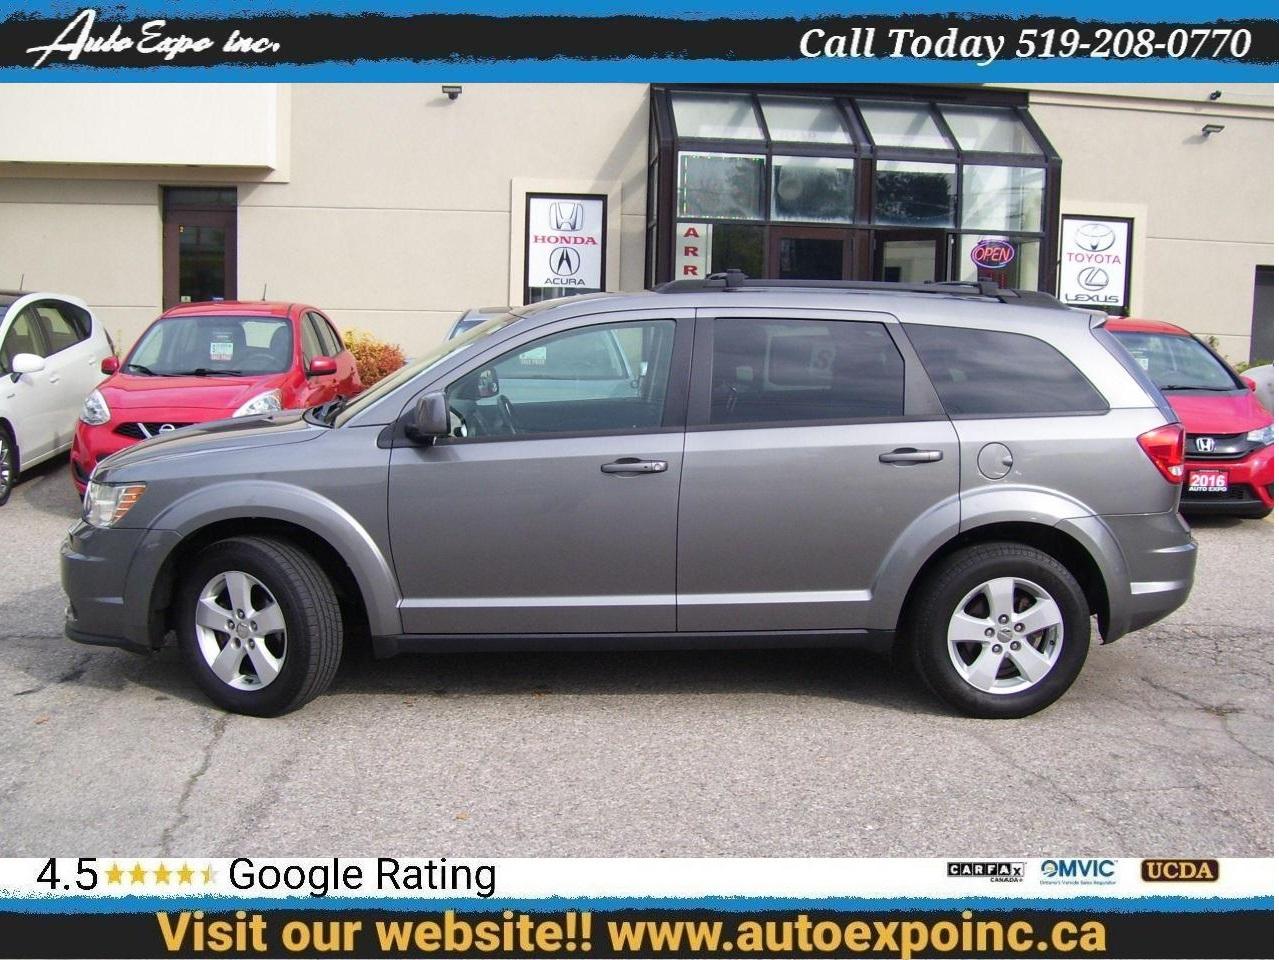 2012 Dodge Journey SE+,Bluetooth,Tinted,Roof Rack,Alloy,Certified,CD - Photo #2